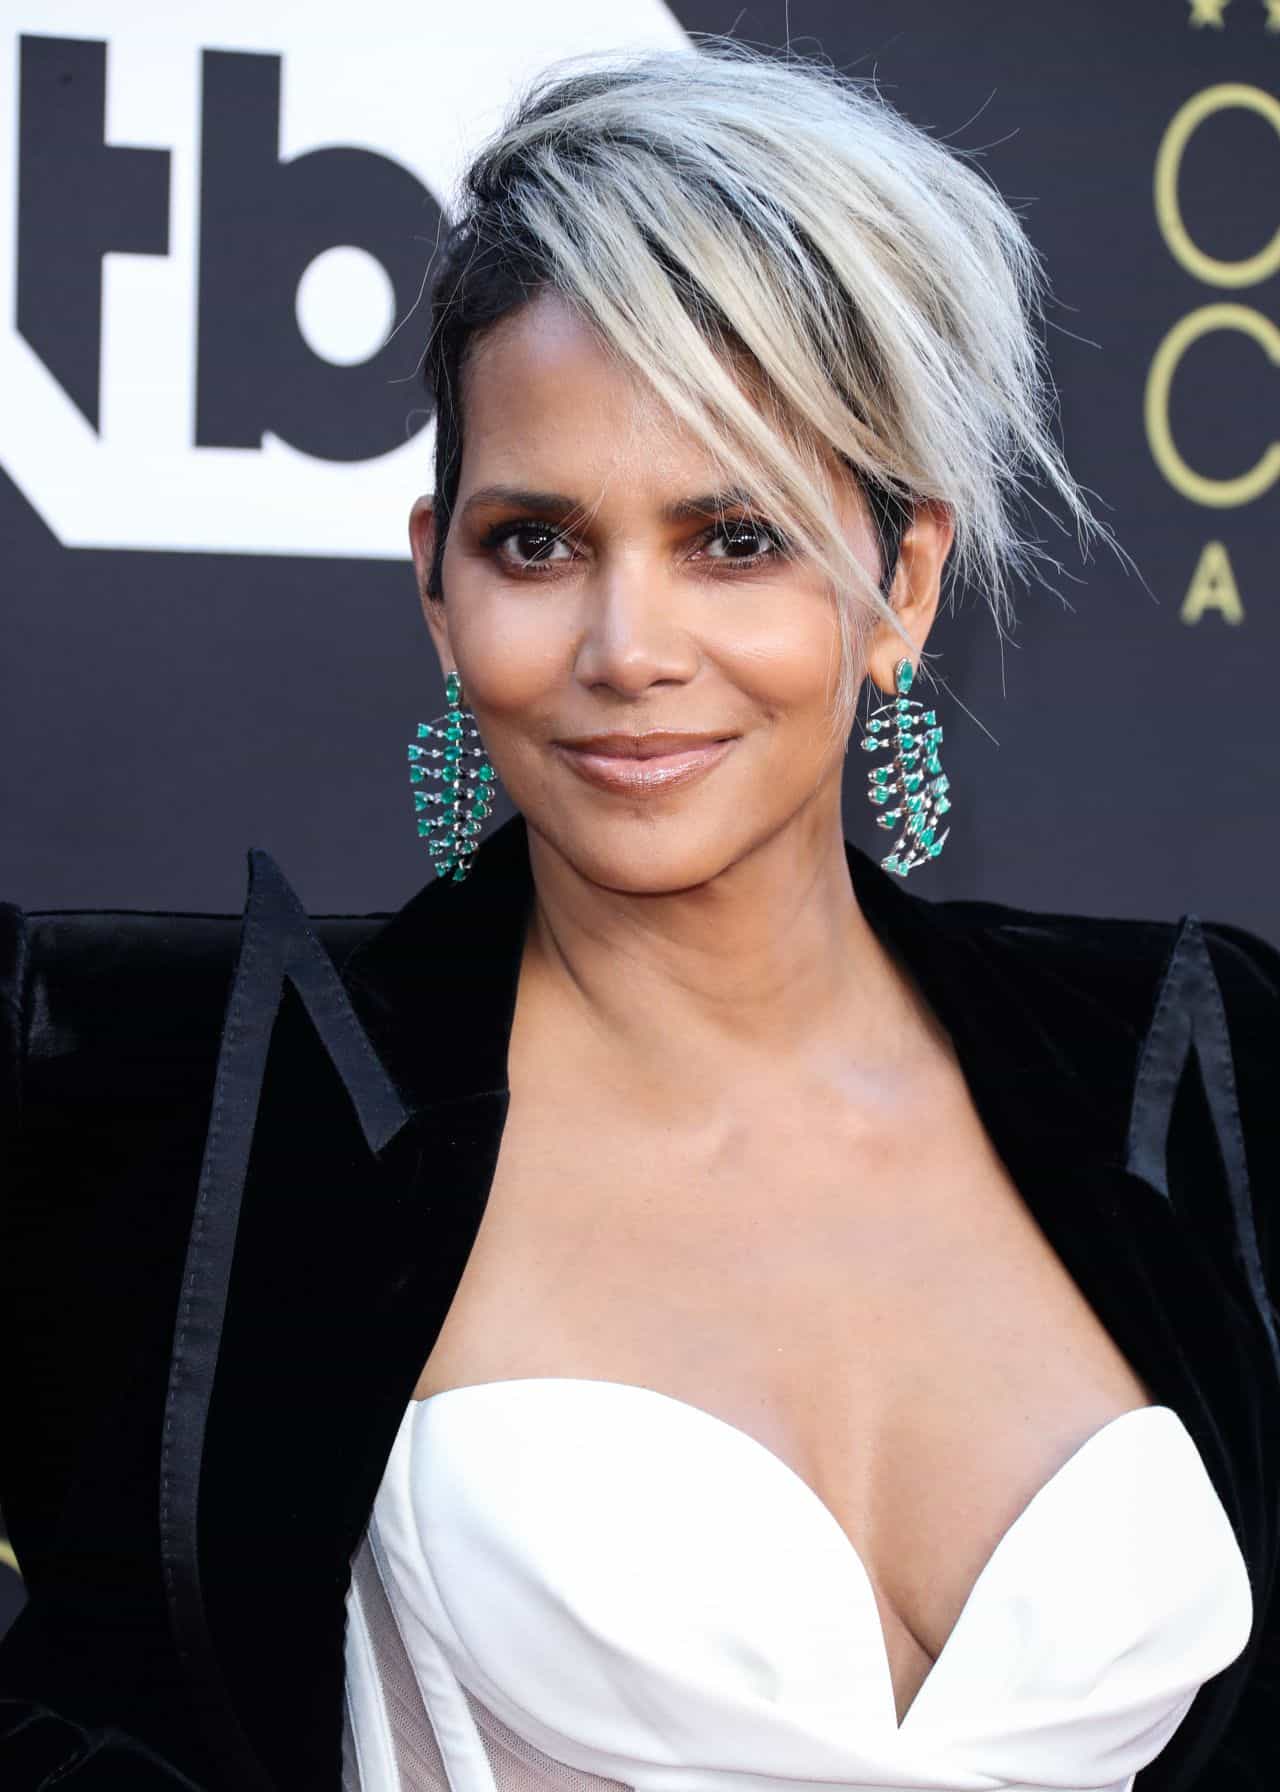 Halle Berry Posing in a Sheer Corset at the Critics' Choice Awards 2022